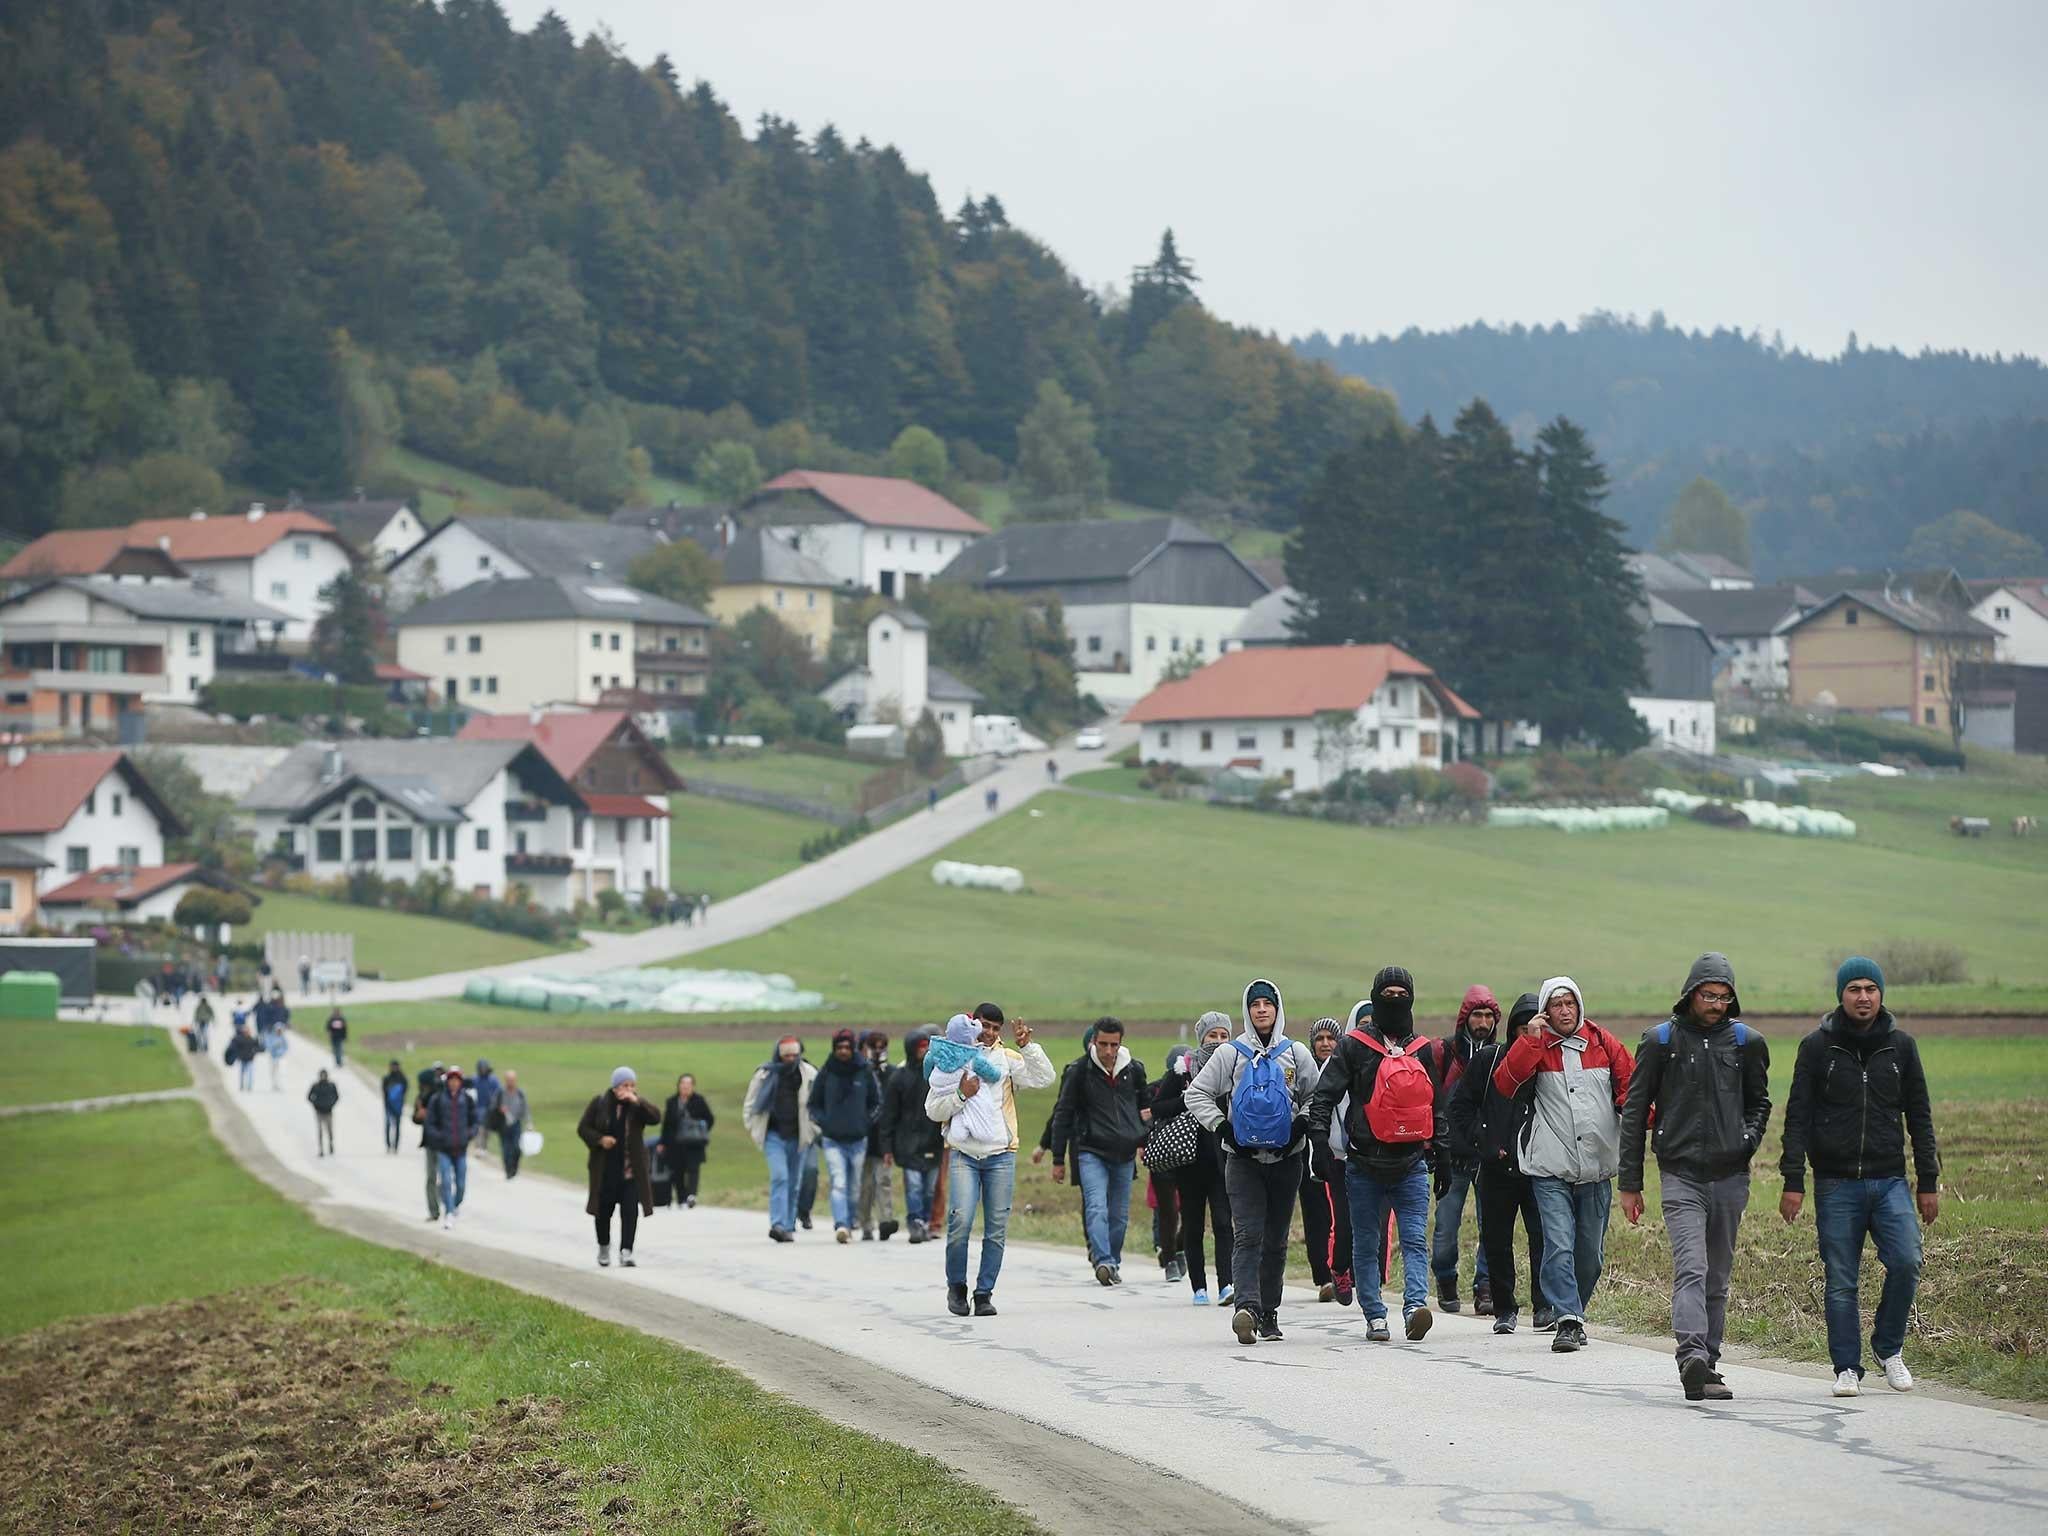 Austria has imposed caps after the arrival of 90,000 asylum seekers in 2015